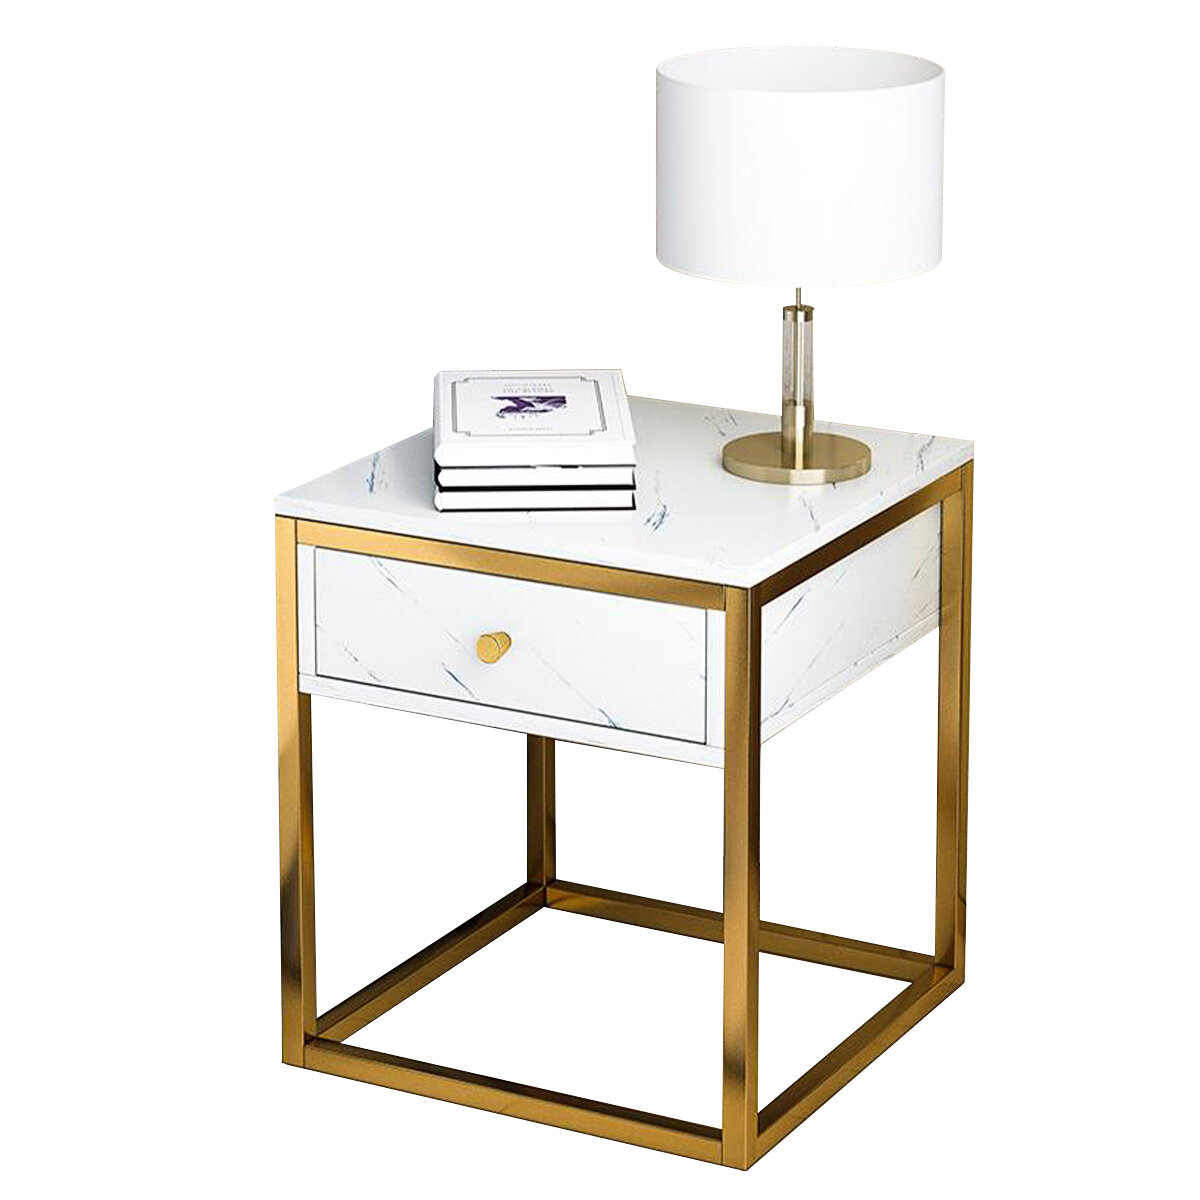 Image of Small Coffee Table Sofa Bedside Nightstand Sundries Storage Cabinet Mini Laptop Desk Home Office Furniture